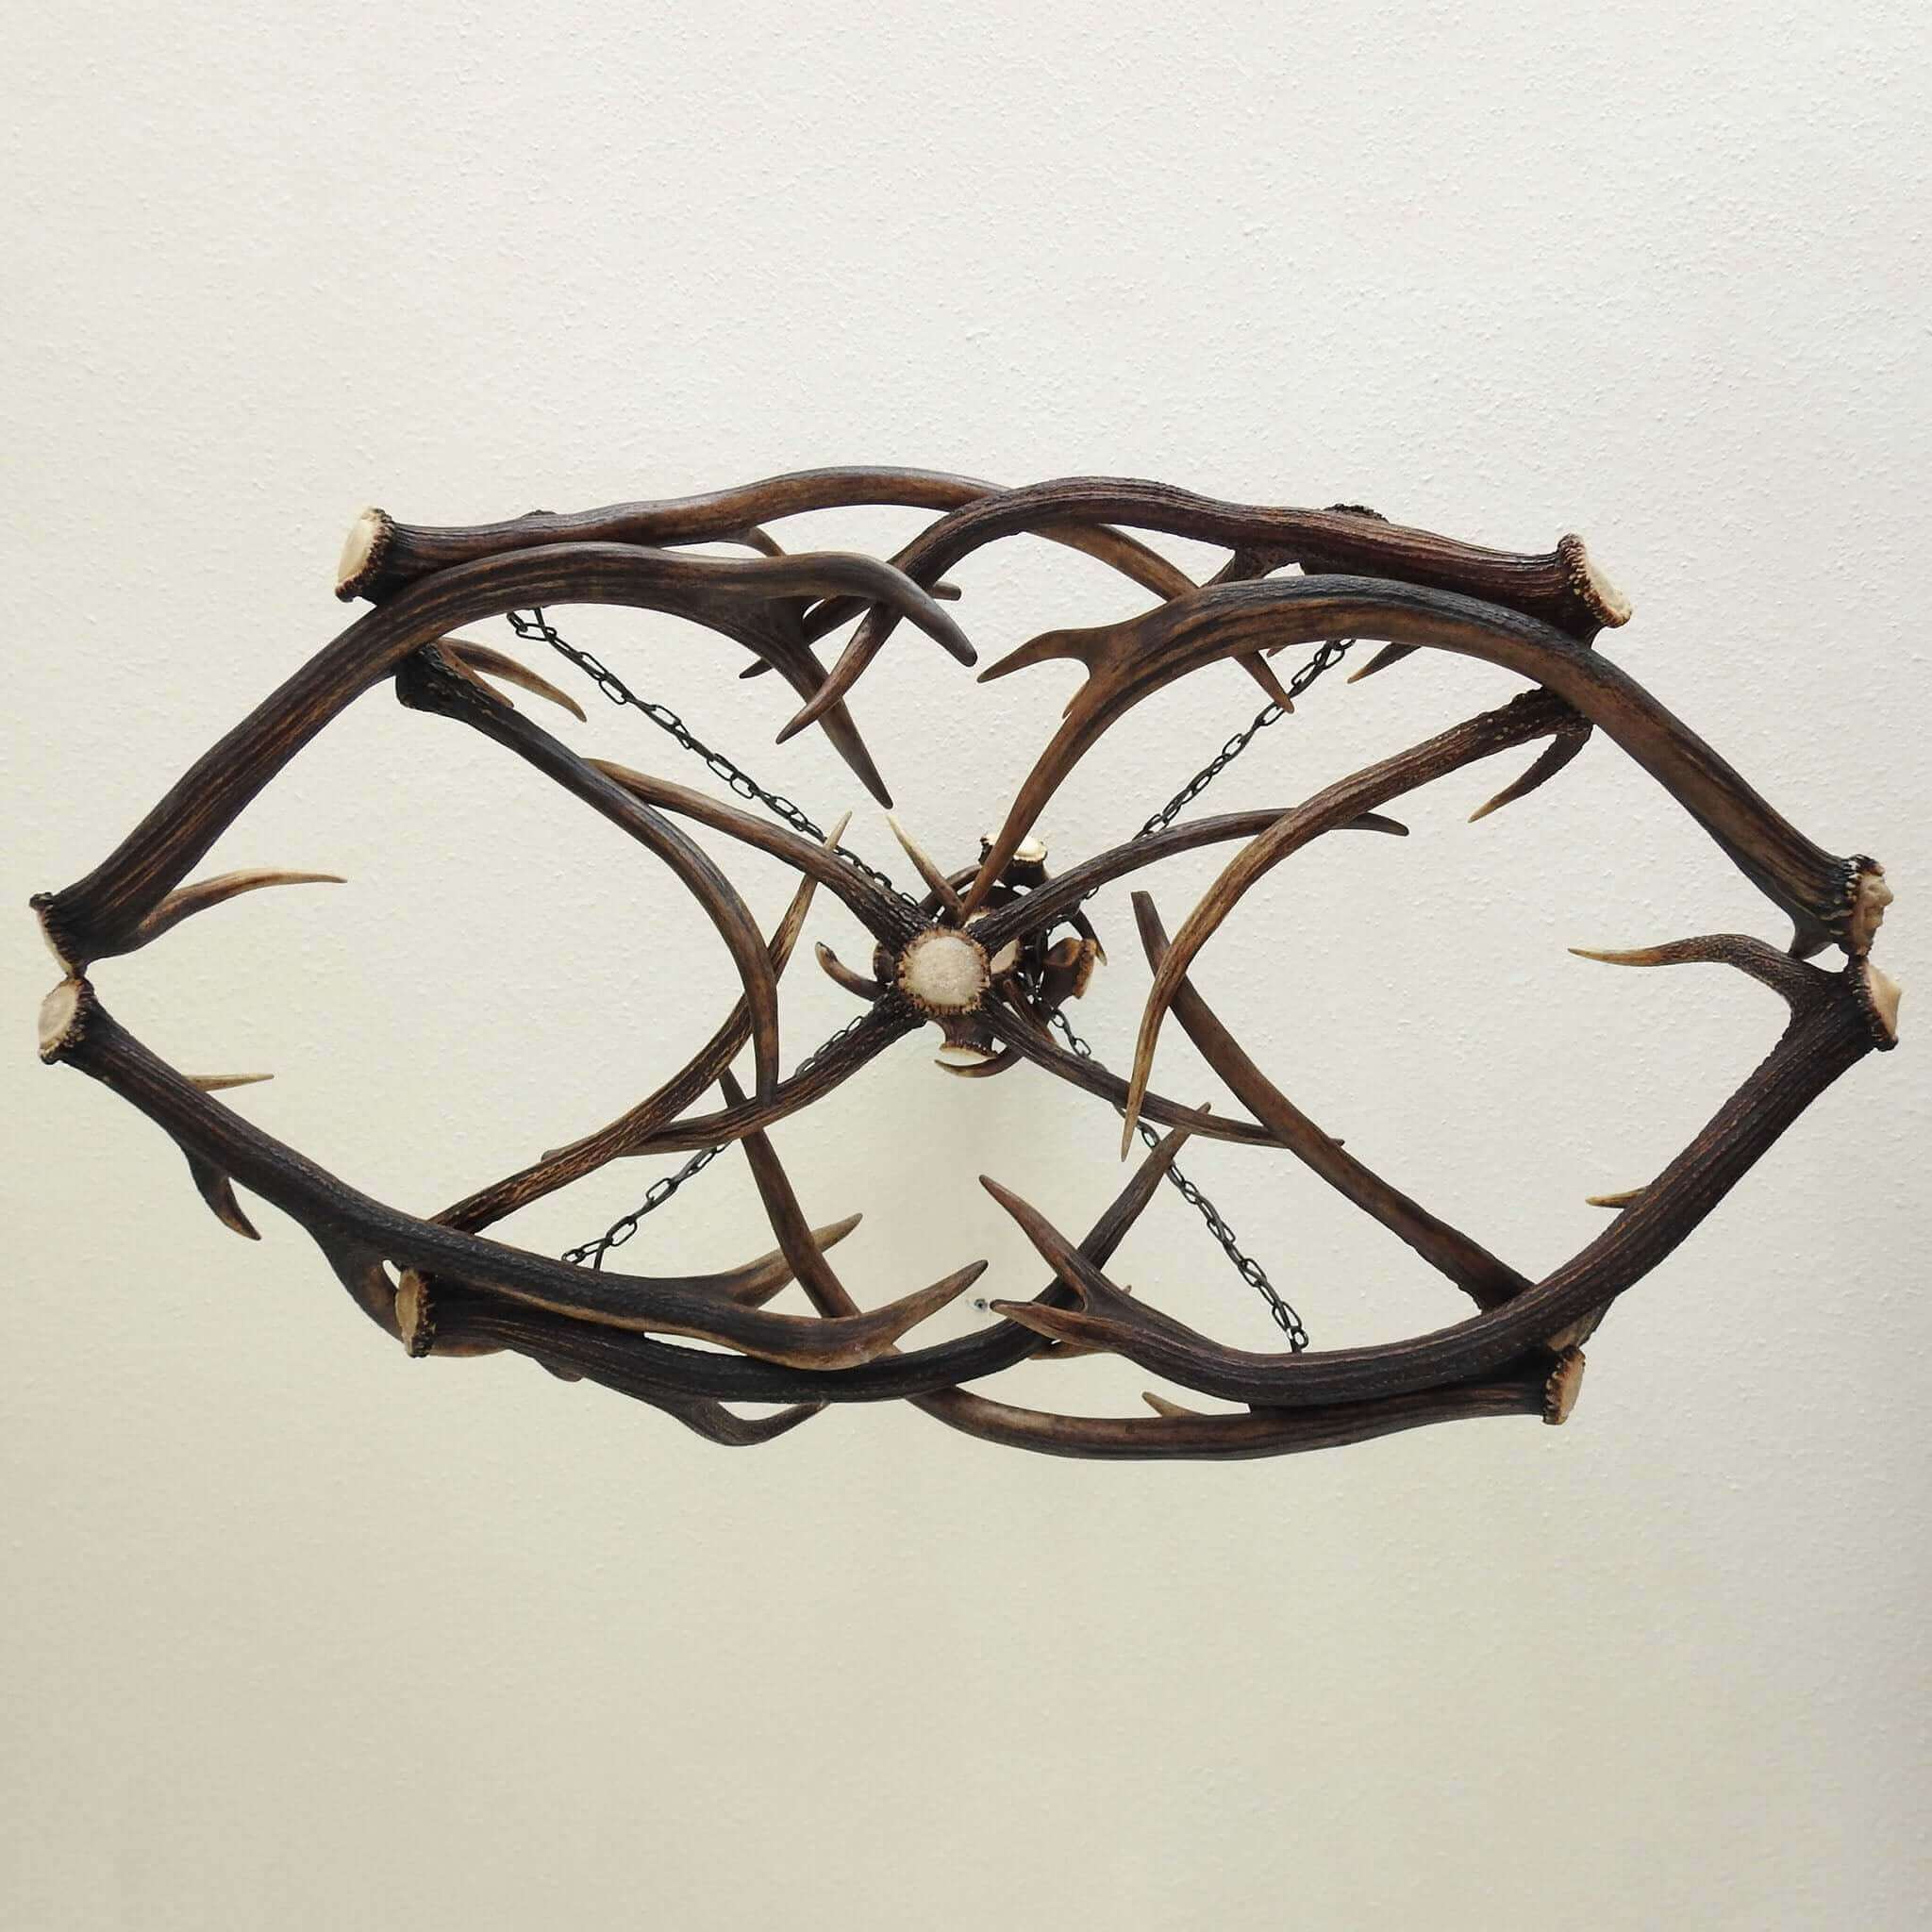 Modern antler chandelier, view from the bottom.